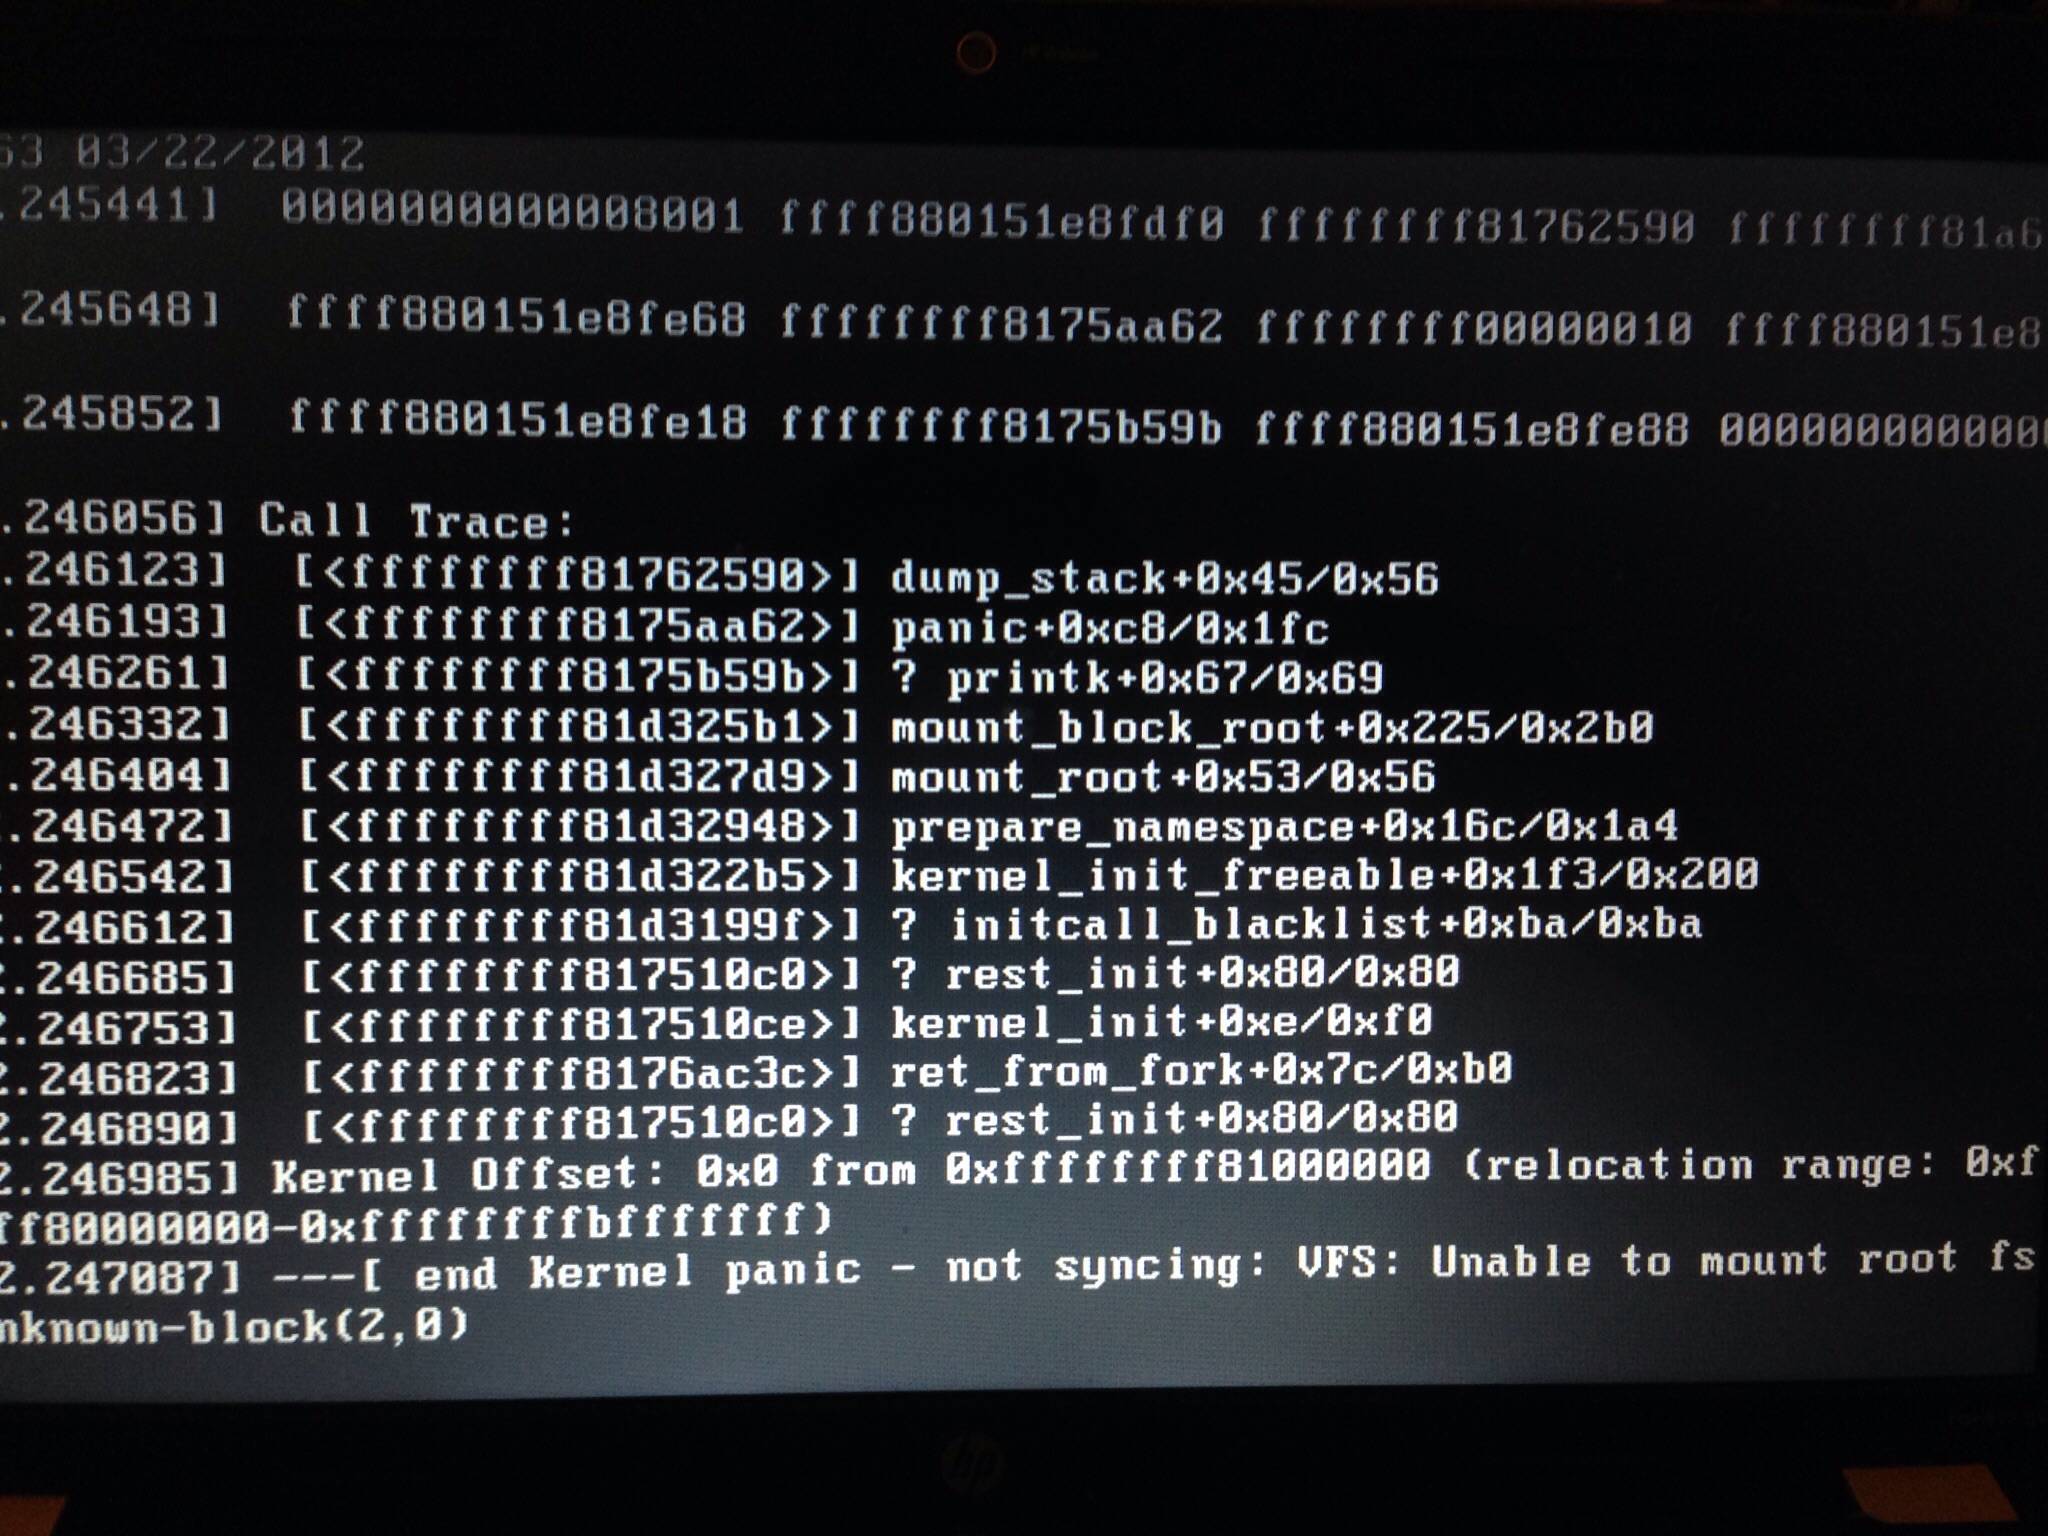 kernel panic not syncing vfs in the position to mount fs